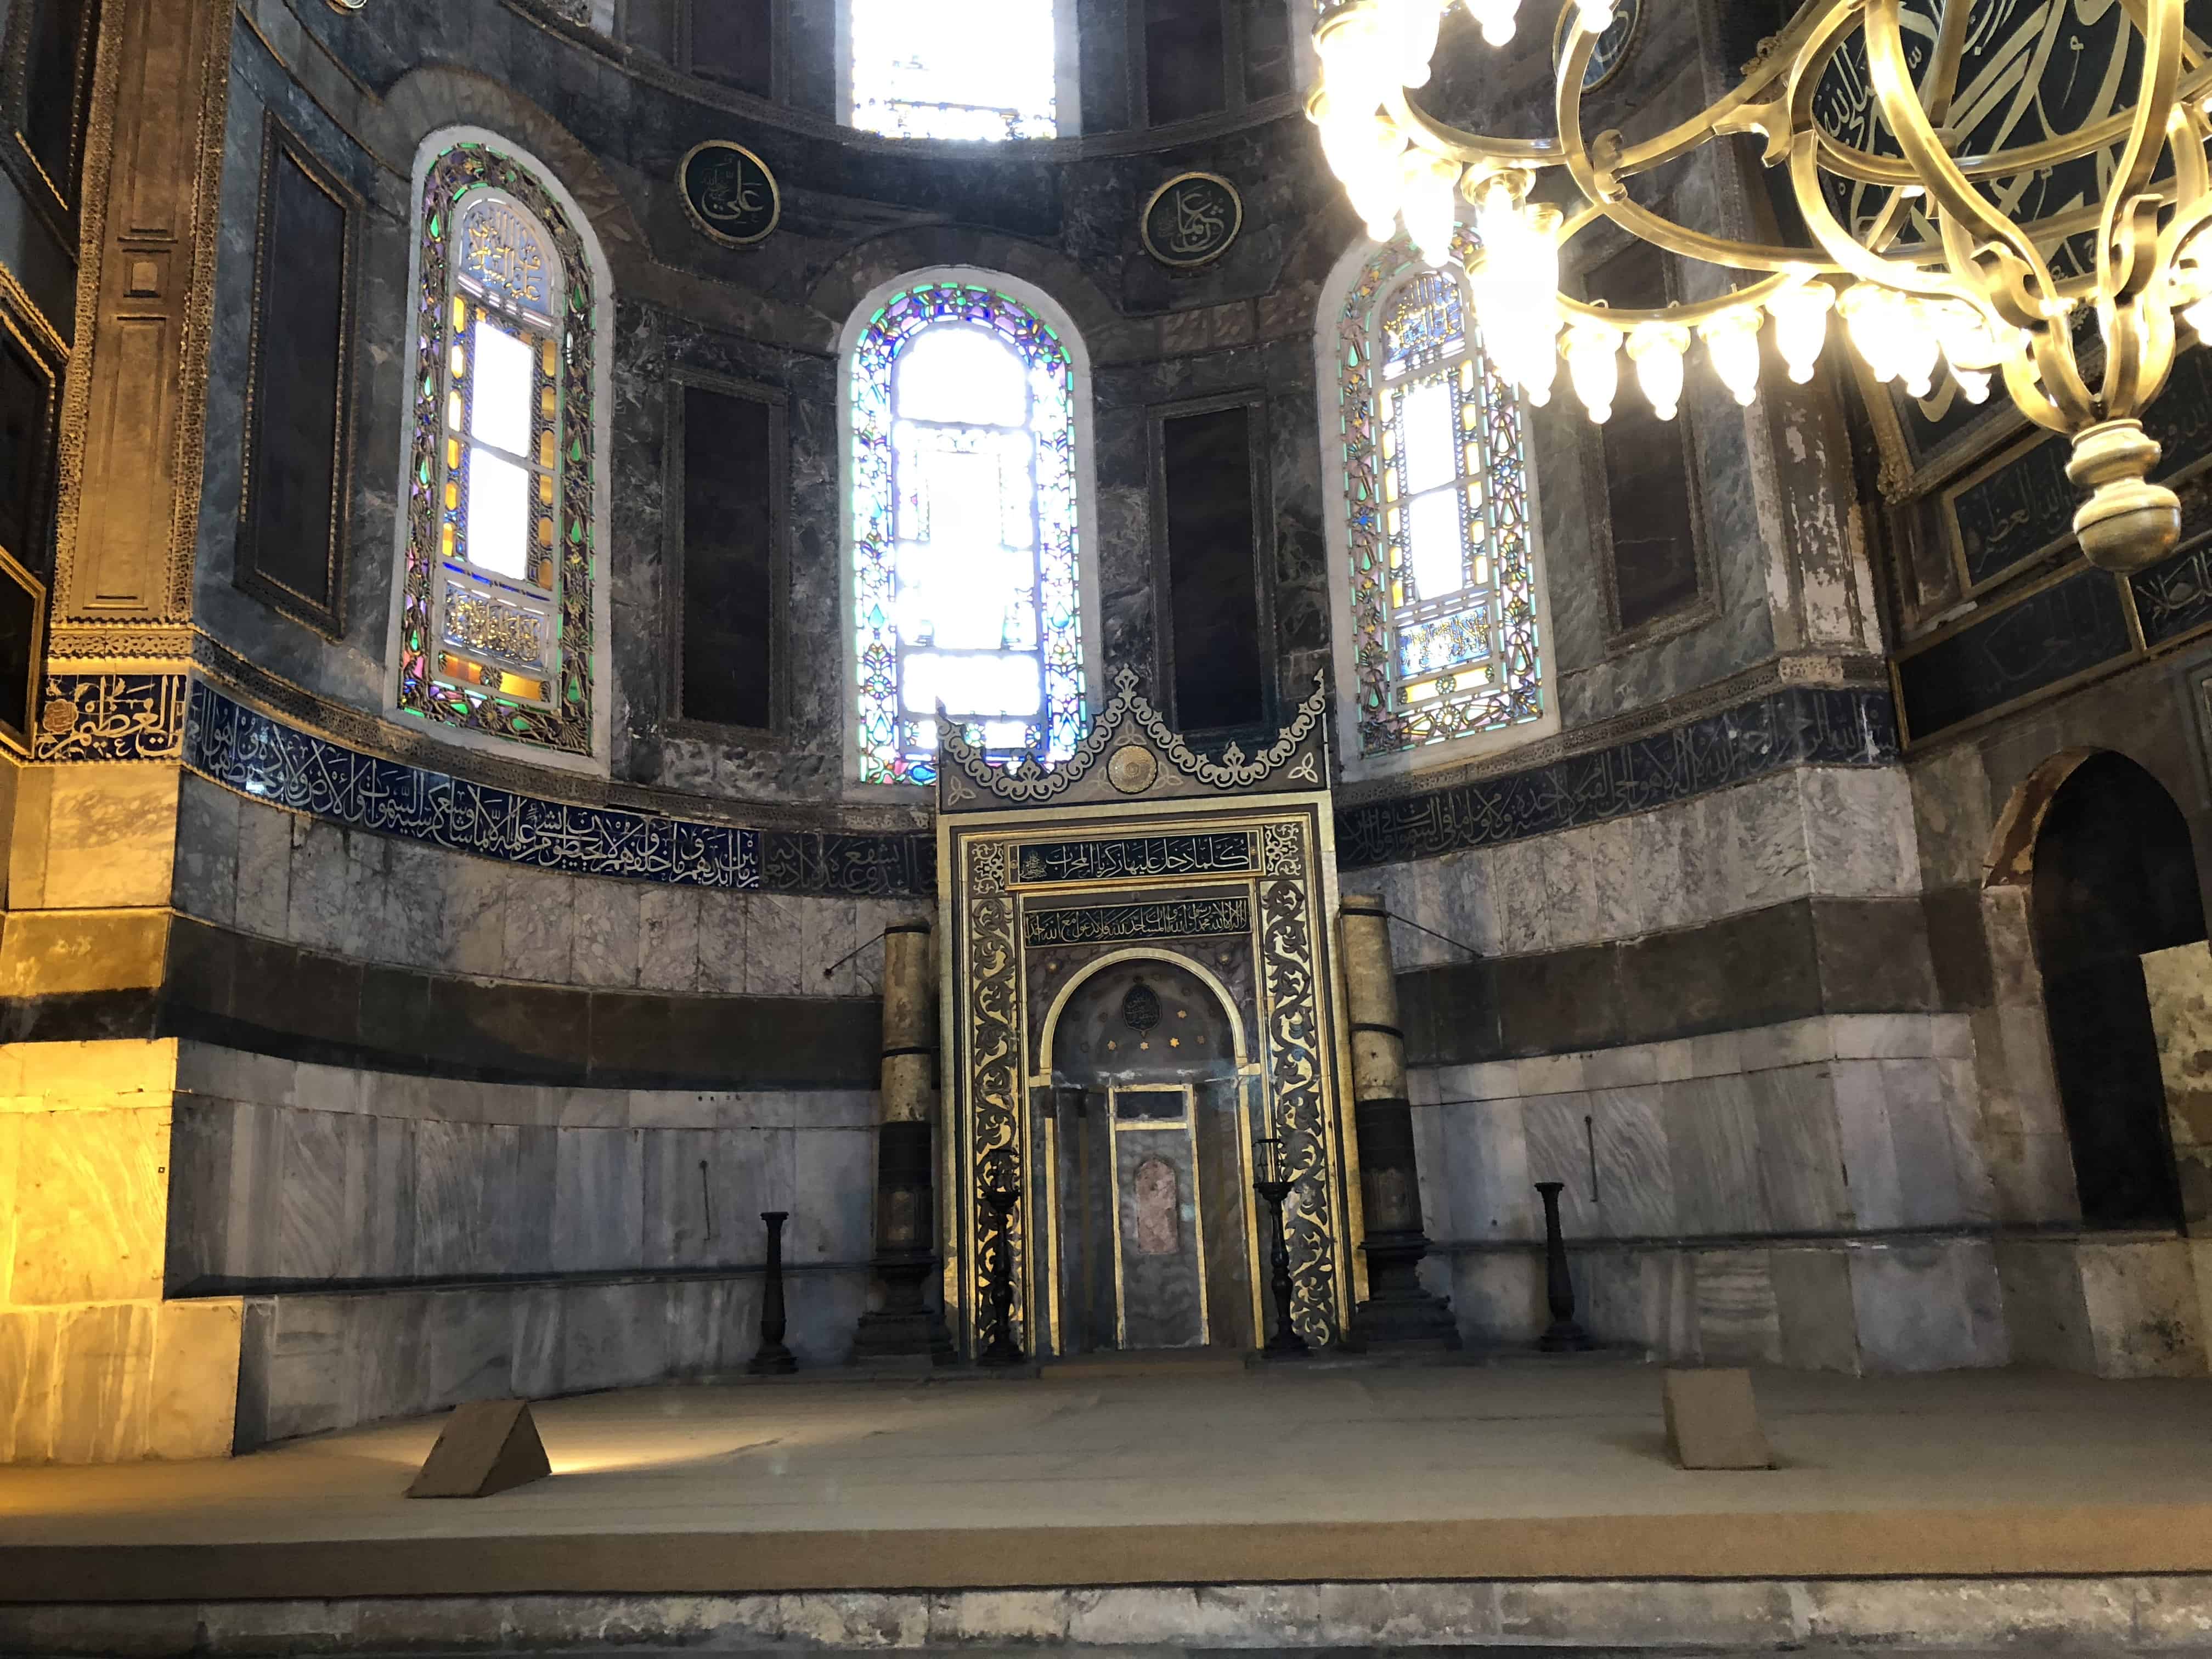 Mihrab and former location of the altar at Hagia Sophia in Istanbul, Turkey